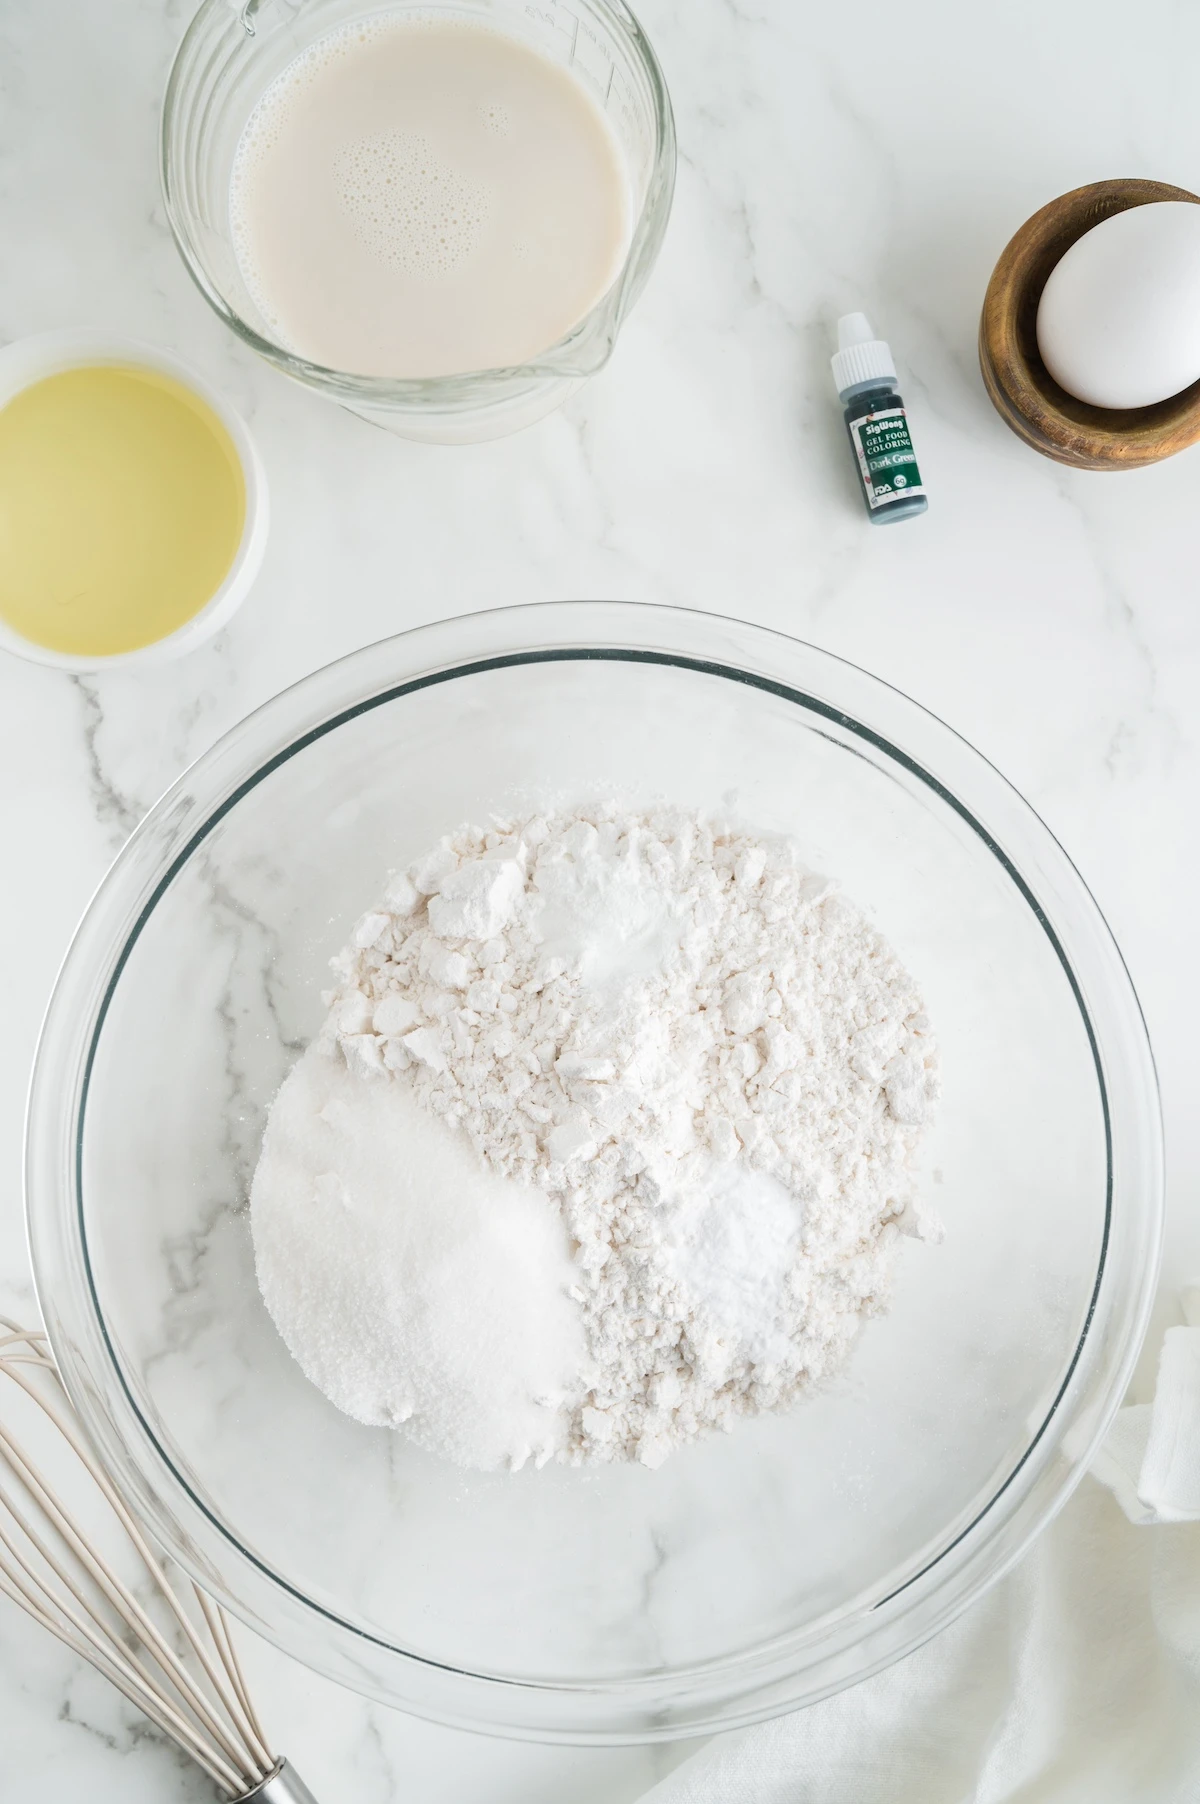 whisk together the dry ingredients flour, sugar, baking powder, and baking soda